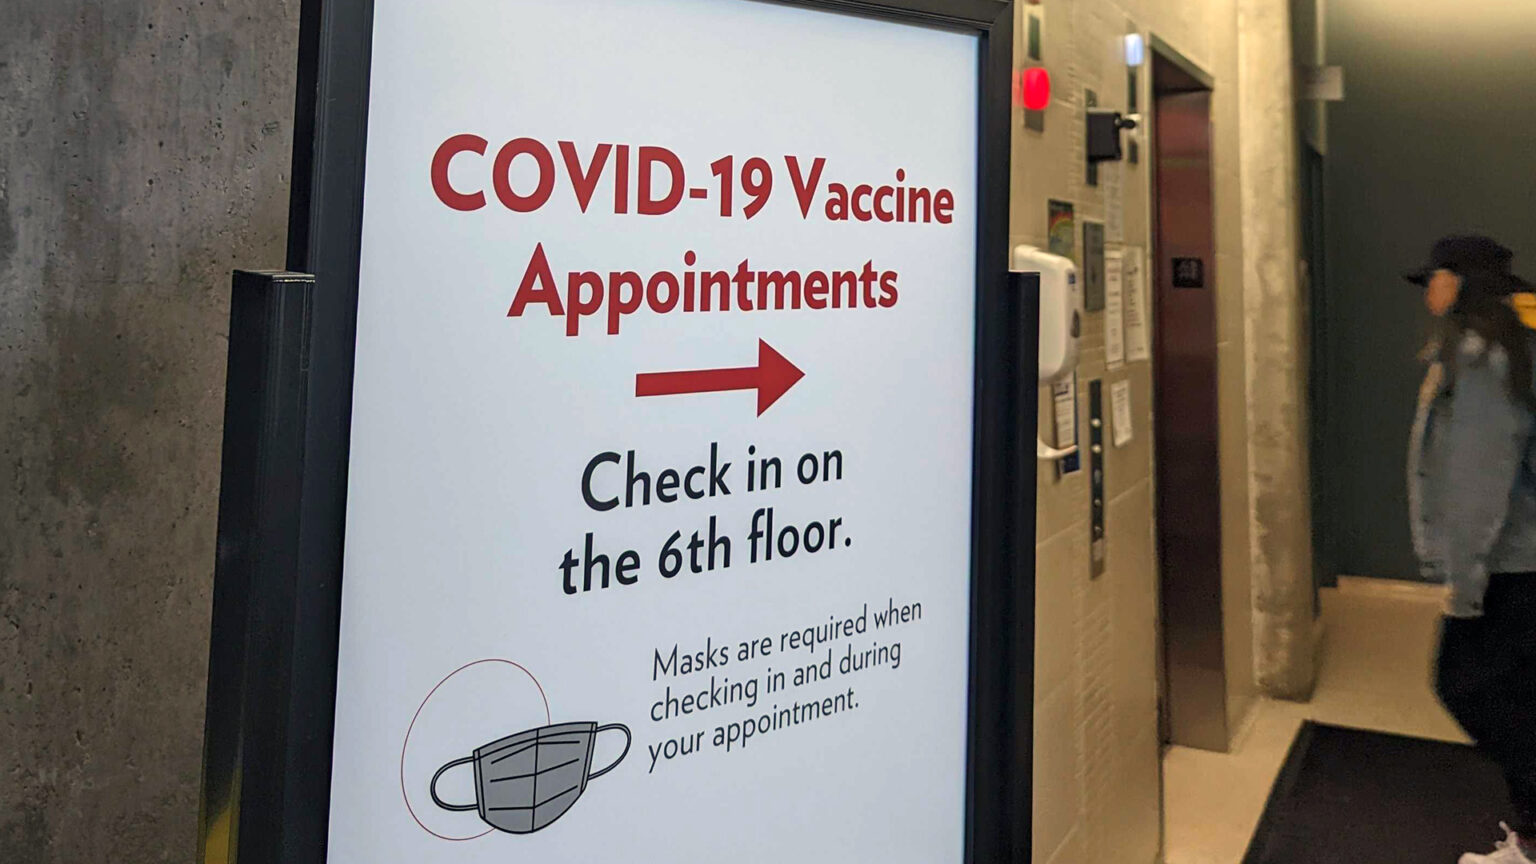 A sign reading COVID-19 Vaccine Appointments with an arrow pointing right, with additional text of Check in on the 6th floor and Masks are required when checking in and during your appointment. stands next to a pair of elevator doors with one person standing in front of them.